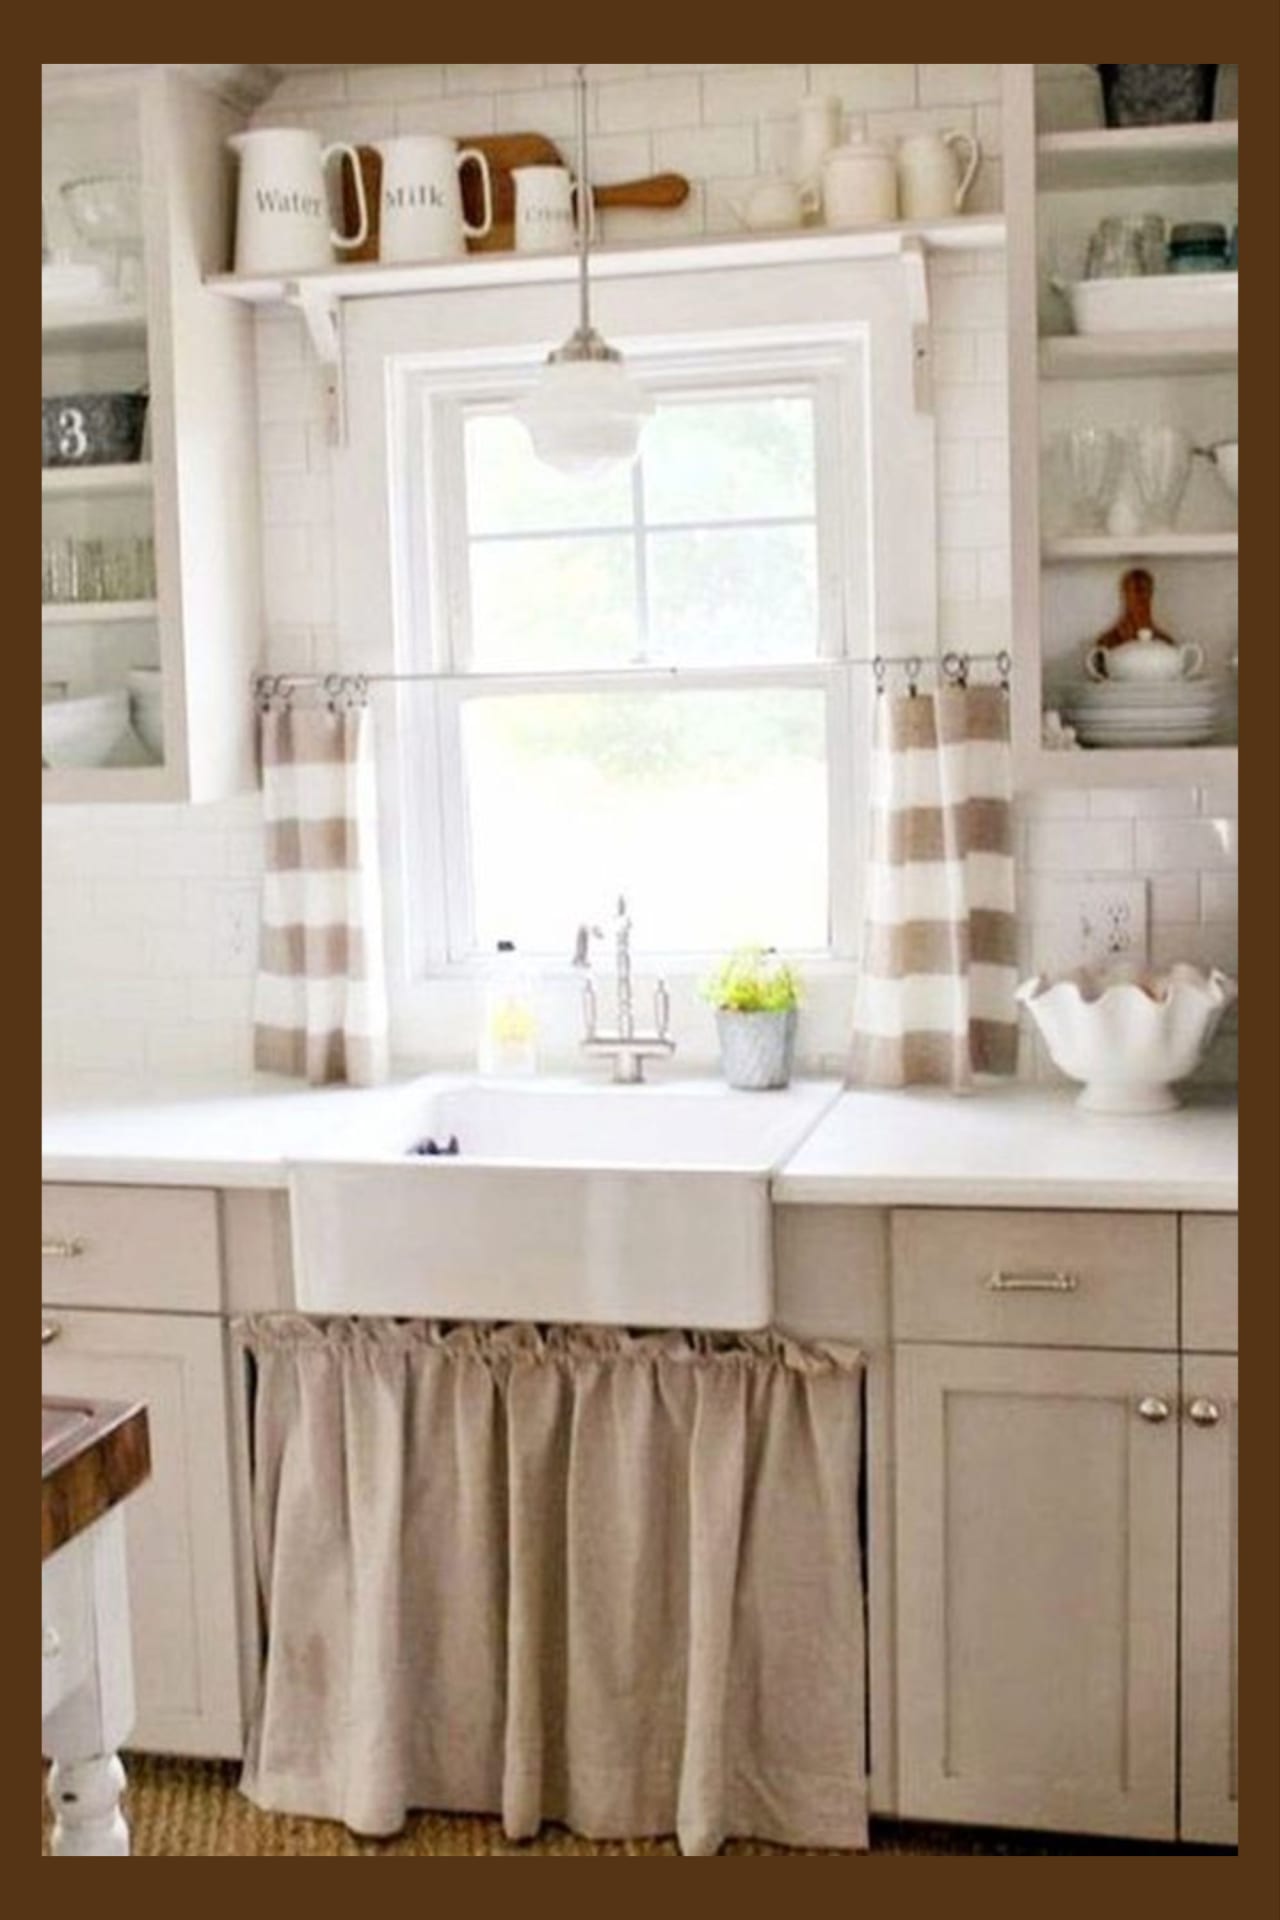 Farmhouse Kitchens! Affordable farmhouse kitchen decor ideas on a budget - cheap and budget-friendly ways to decorate a farmhouse kitchen or country living cottage kitchen in your house on a budget